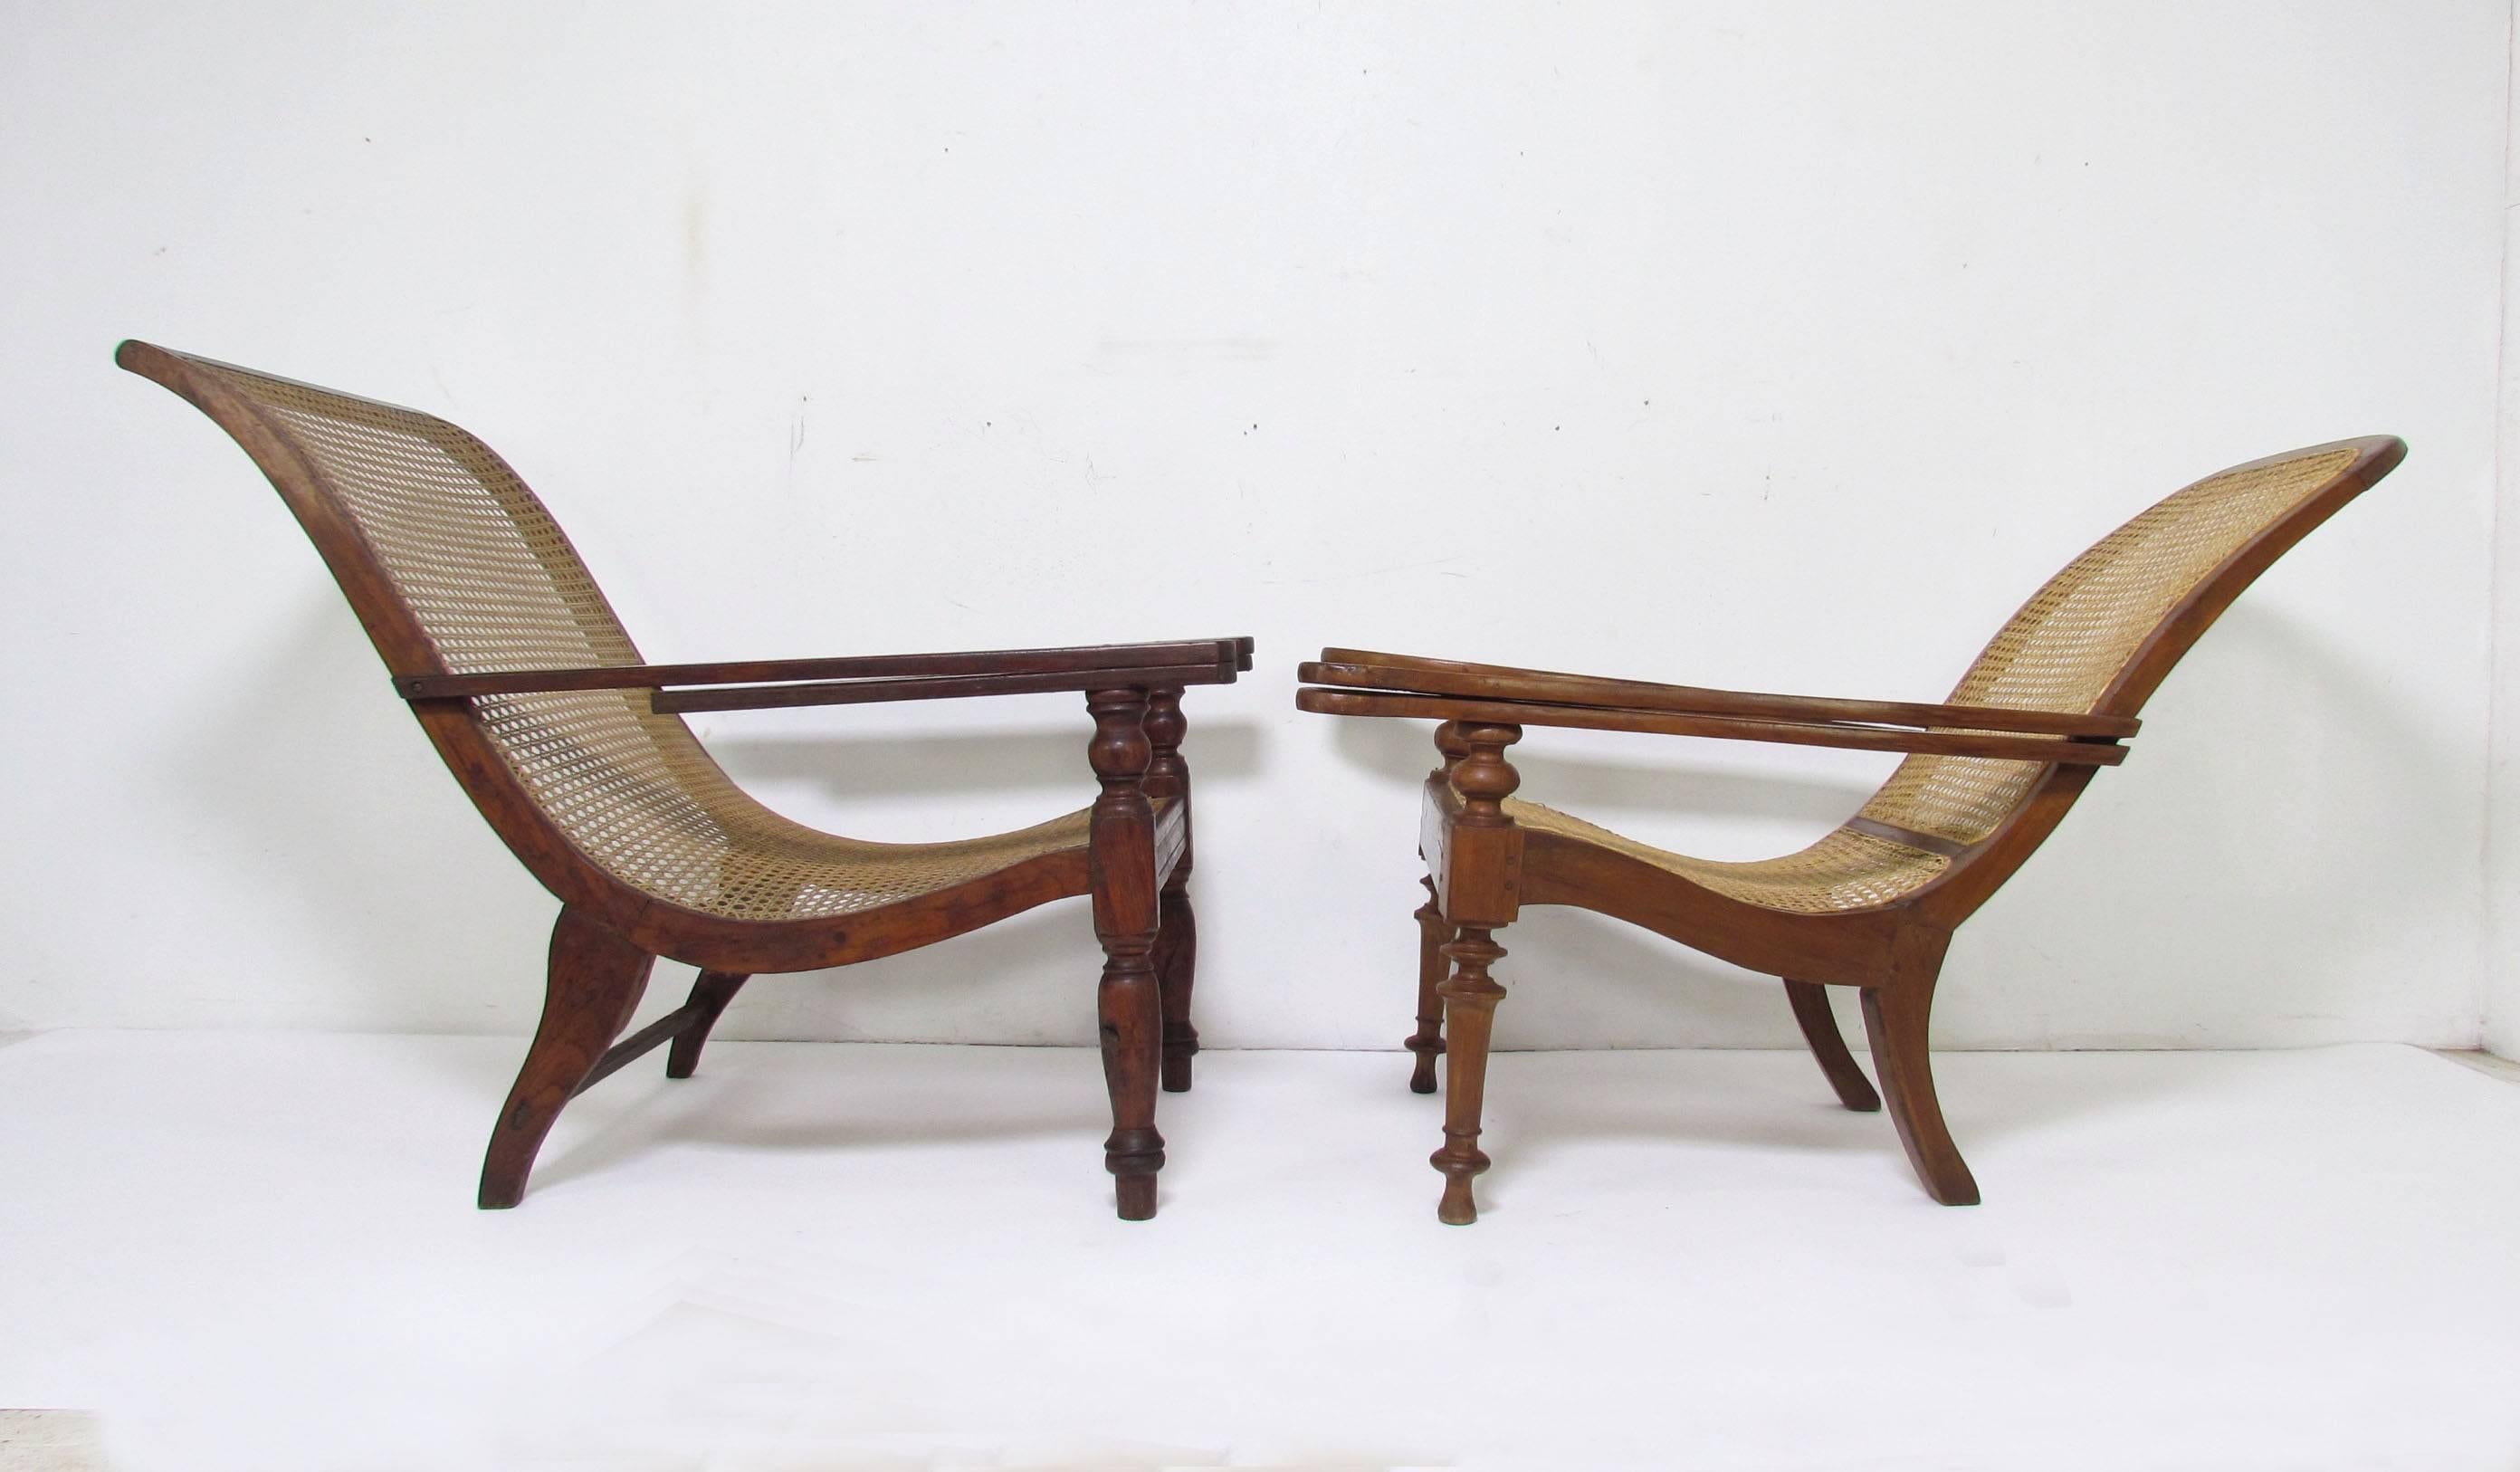 CHAIR ON THE LEFT IS SOLD.
 Antique Anglo-Indian long paddle arm plantation lounge chairs, circa late 19th century.

Both retain their "swing out" extensions for reclining with legs up.

SOLD: The one of the left measures 26.25" wide,